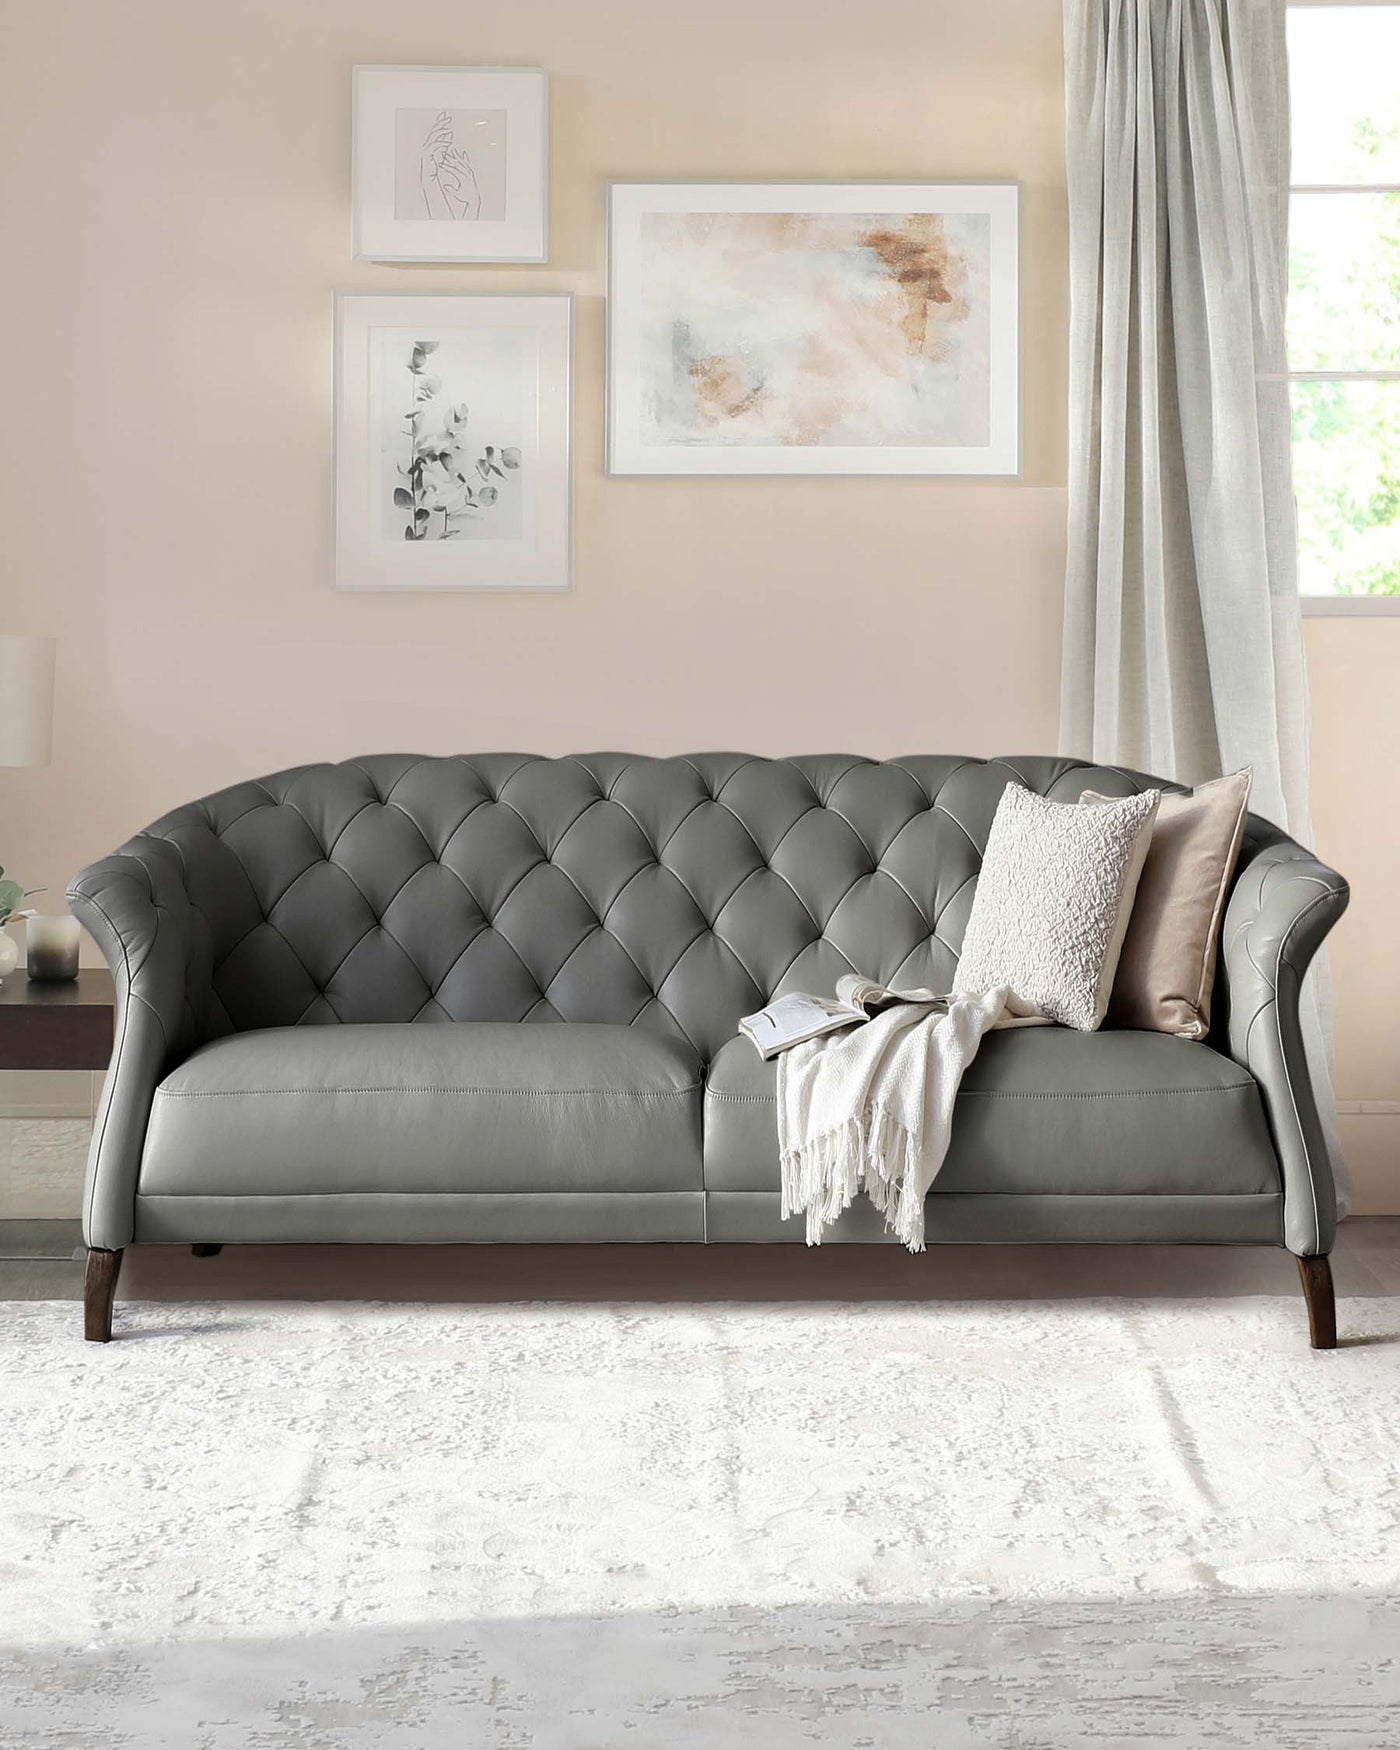 Elegant grey tufted Chesterfield sofa with rolled arms and wooden legs, adorned with two throw pillows and a cream blanket, set against a neutral-toned wall with framed artwork, above a textured white area rug.